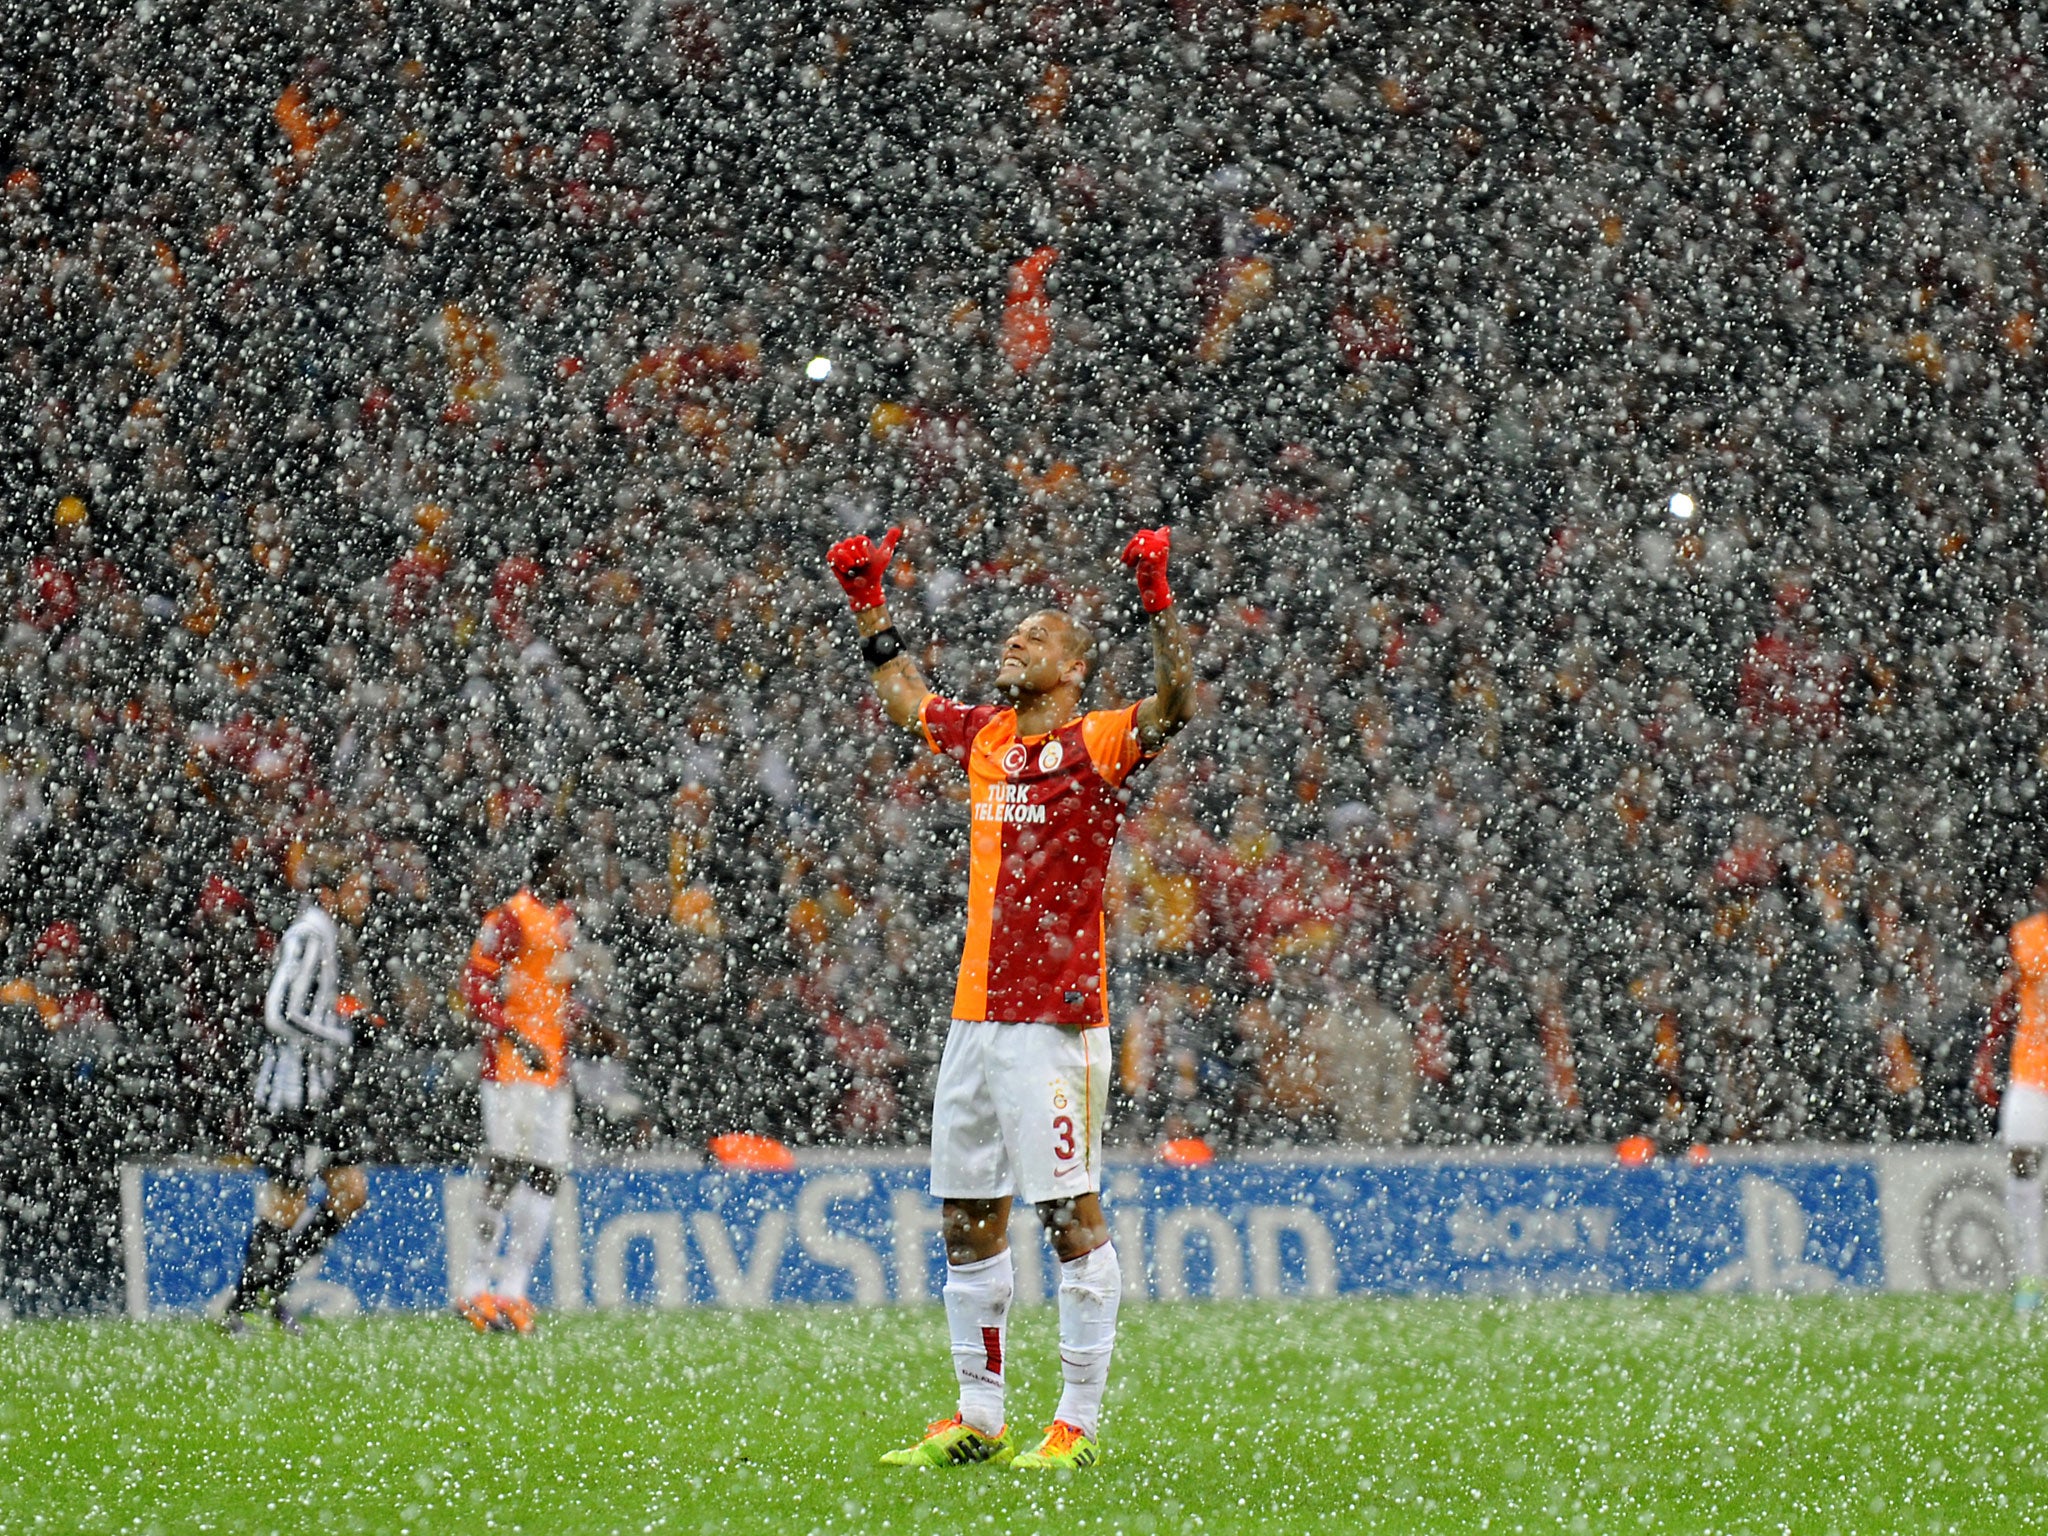 Galatasaray midfielder Felipe Melo raises his arms as the snow falls in Istanbul